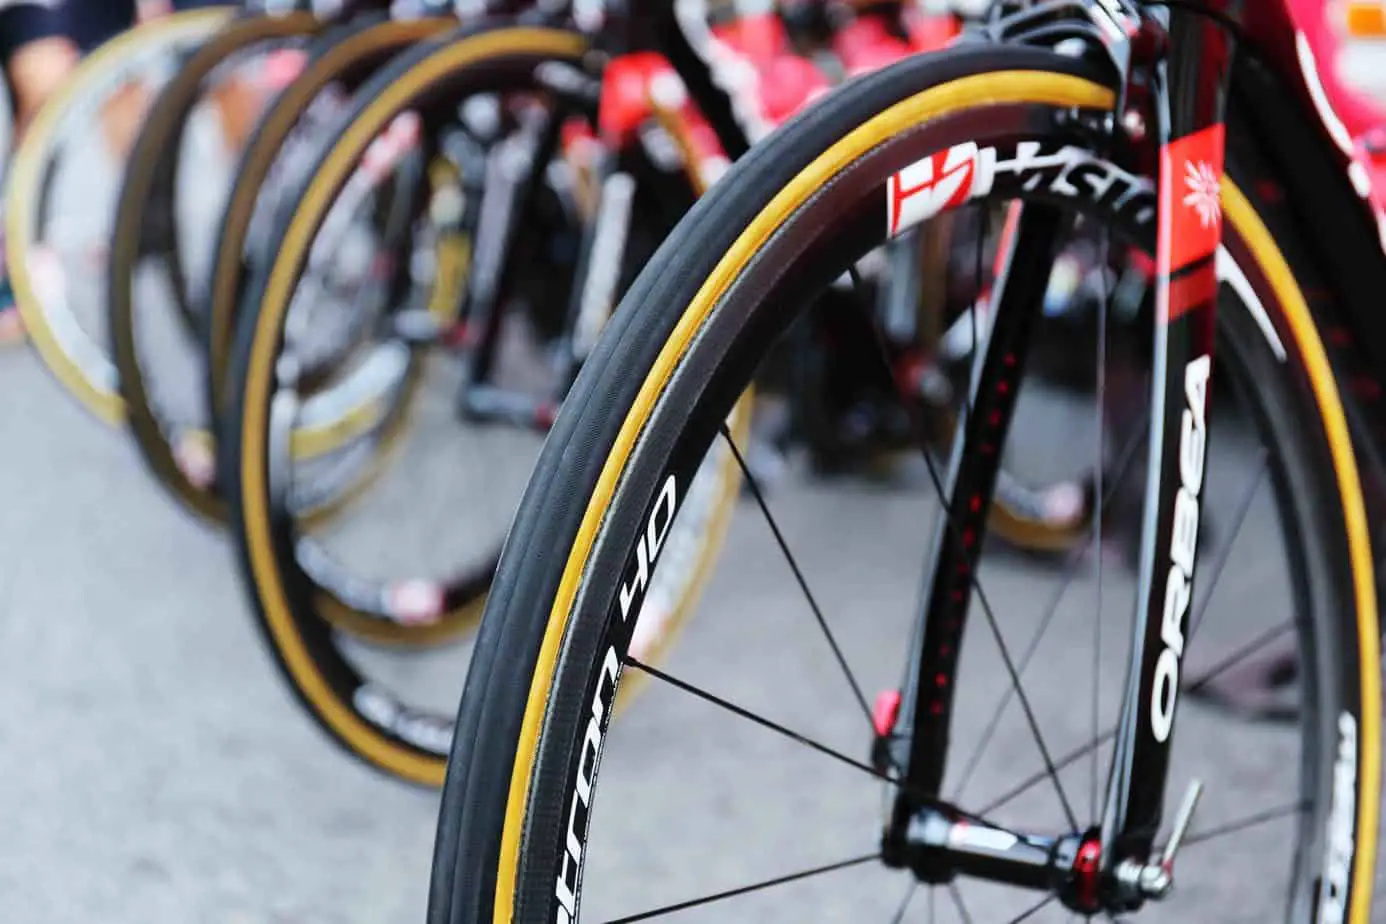 Why Do Road Bikes Have Narrow Tires 1 scaled - Why Do Road Bikes Have Narrow Tires?